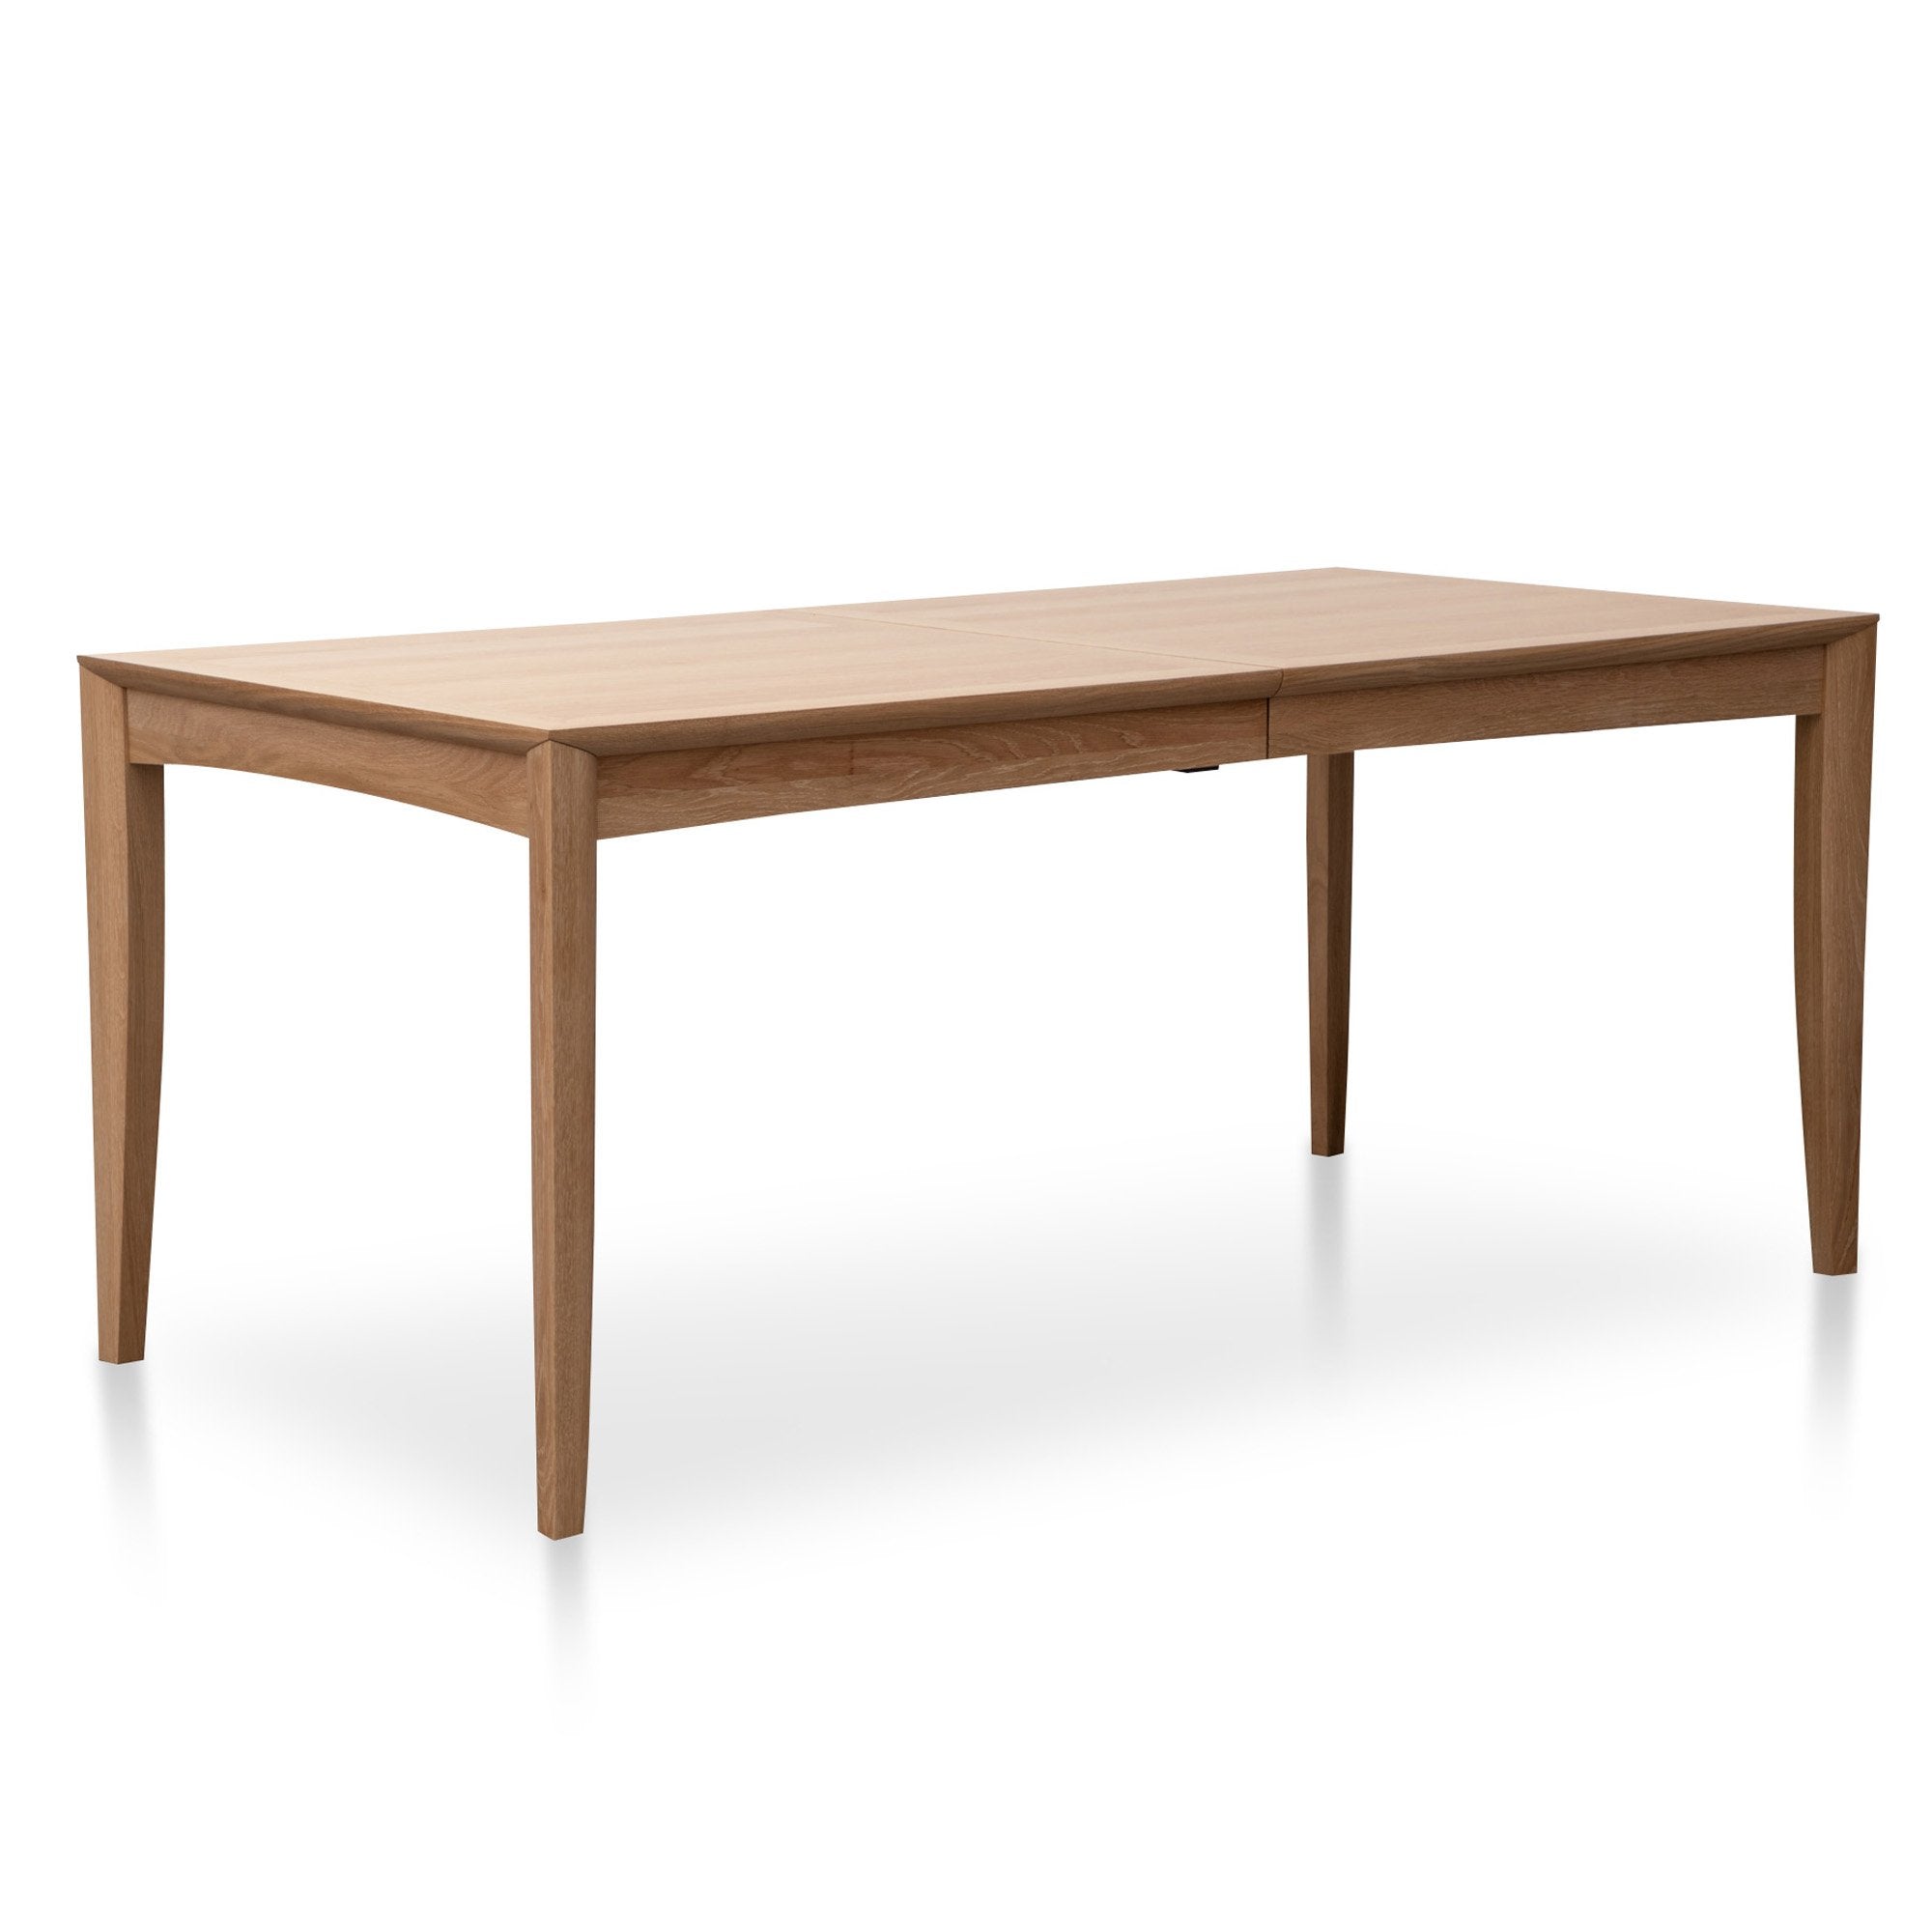 Veram Extendable Wooden Dining Table - Natural - Dining Tables